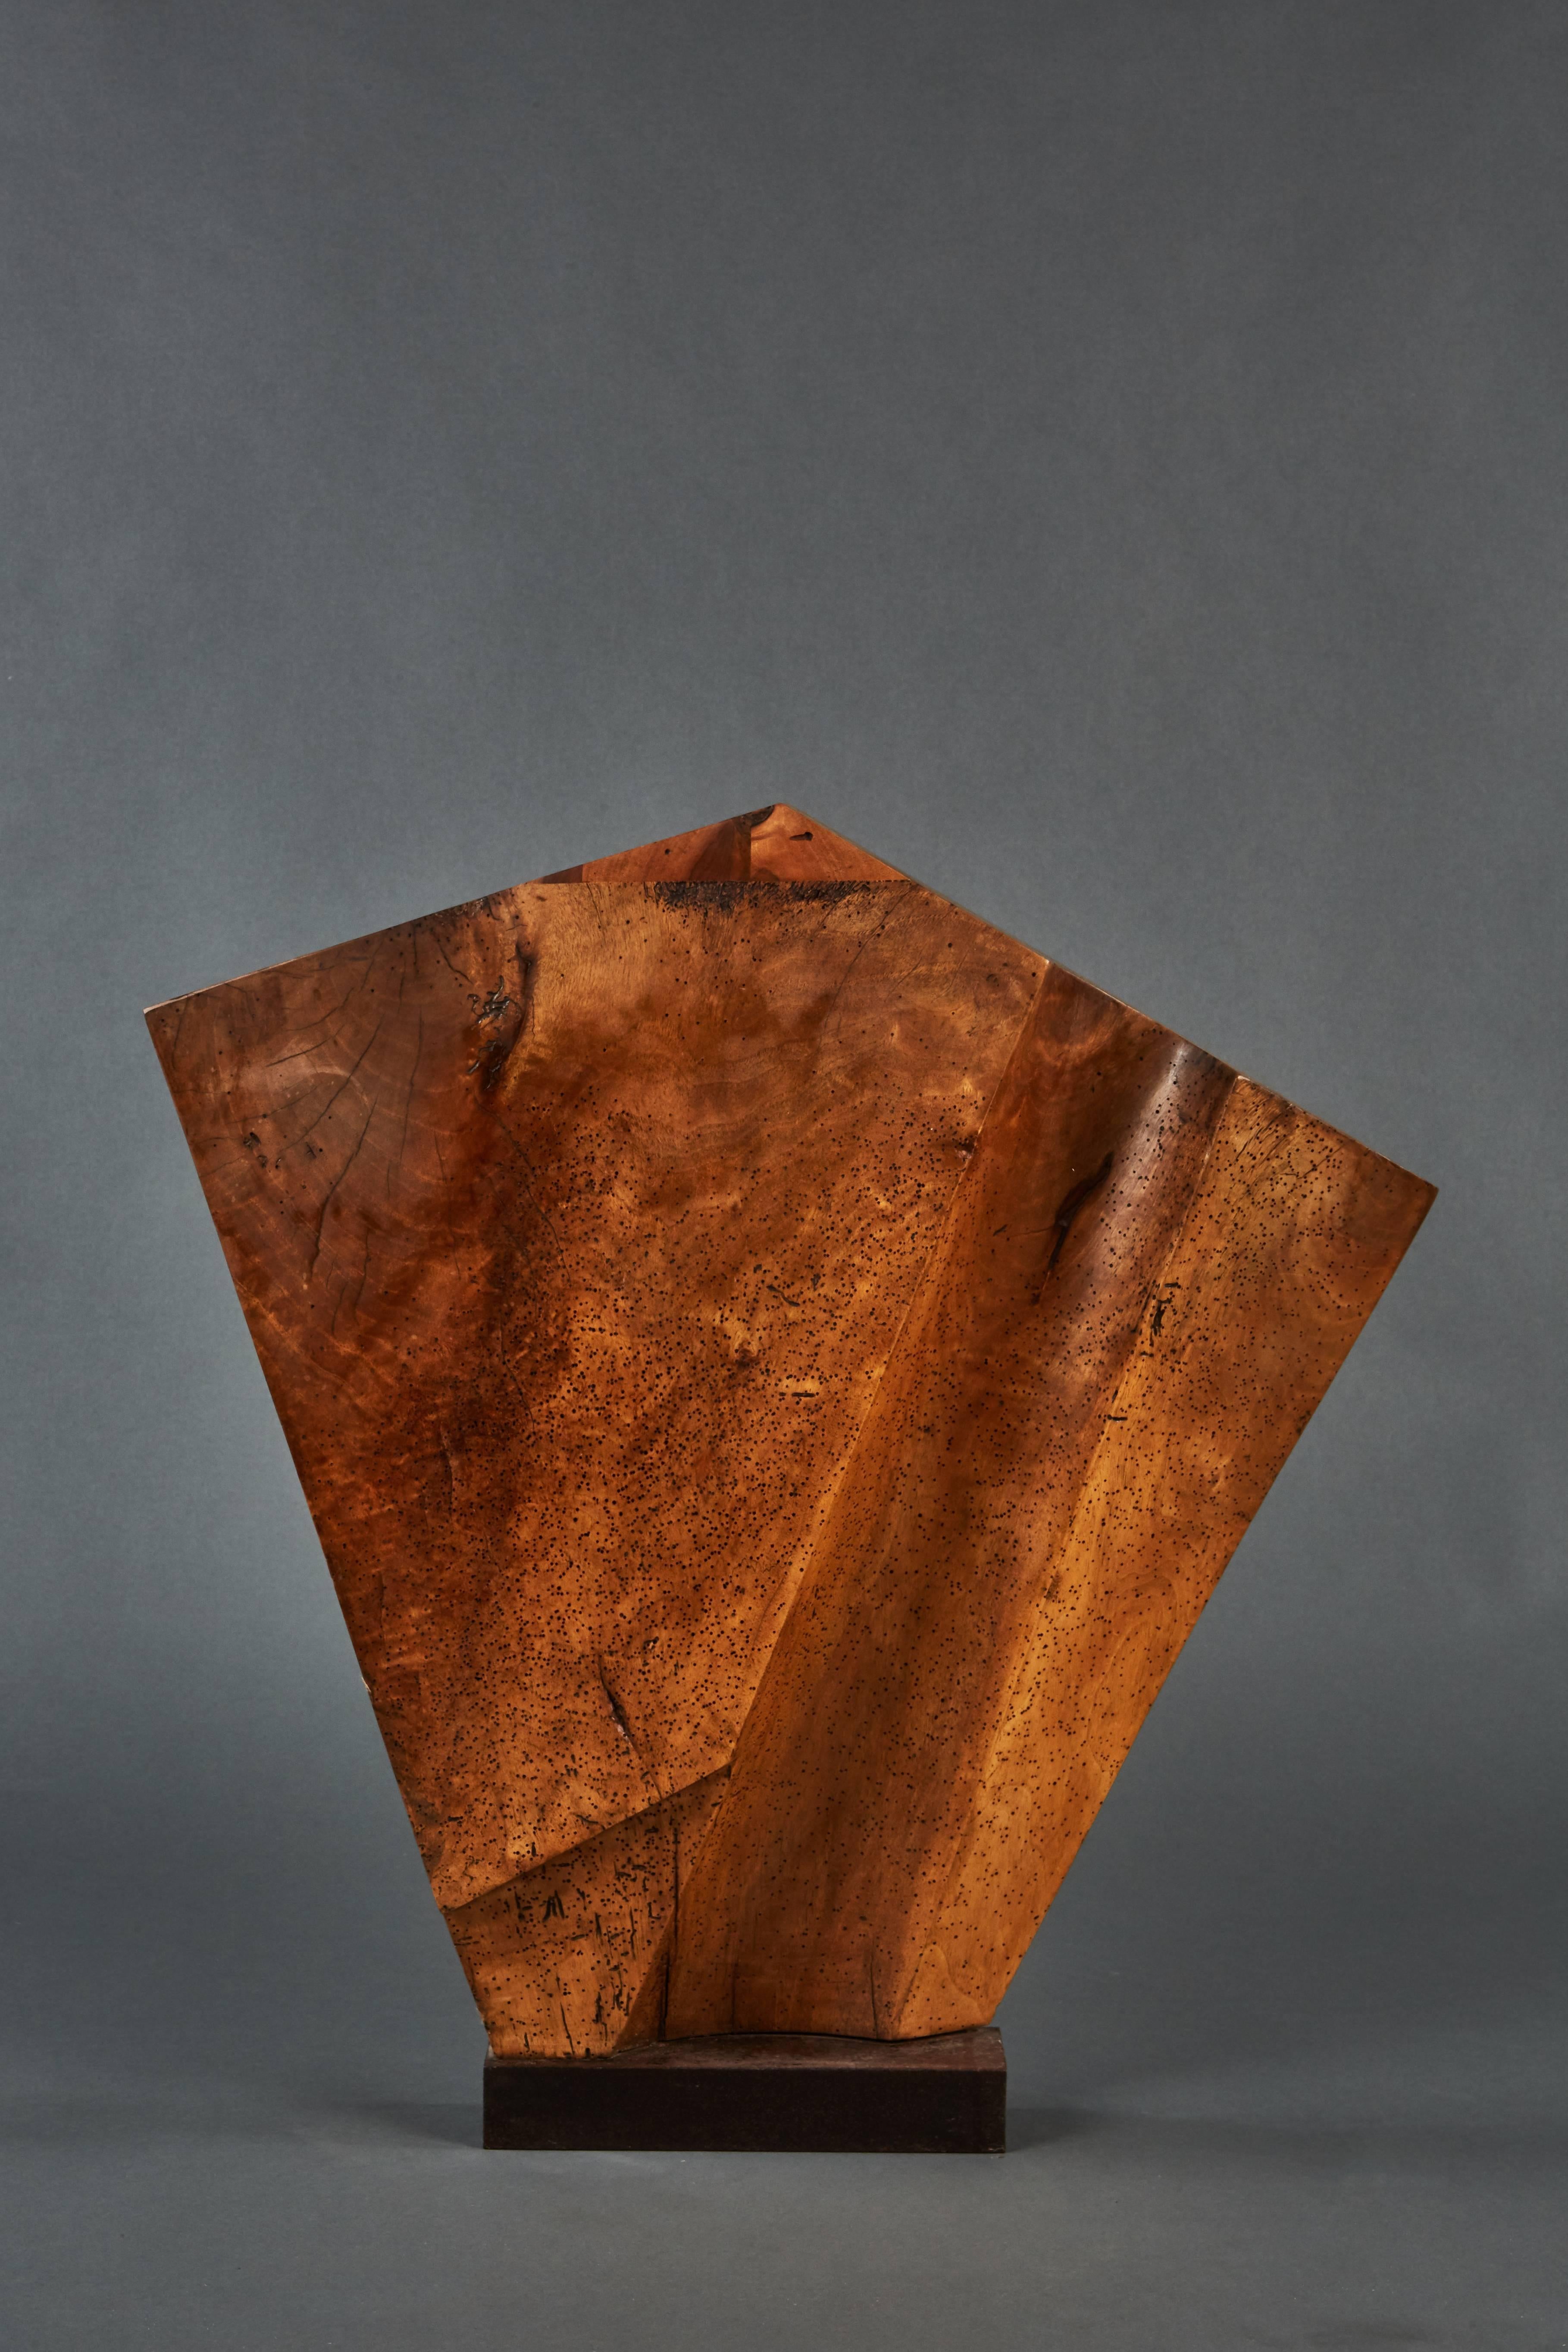 A bold and striking wood sculpture mounted on a metal base.